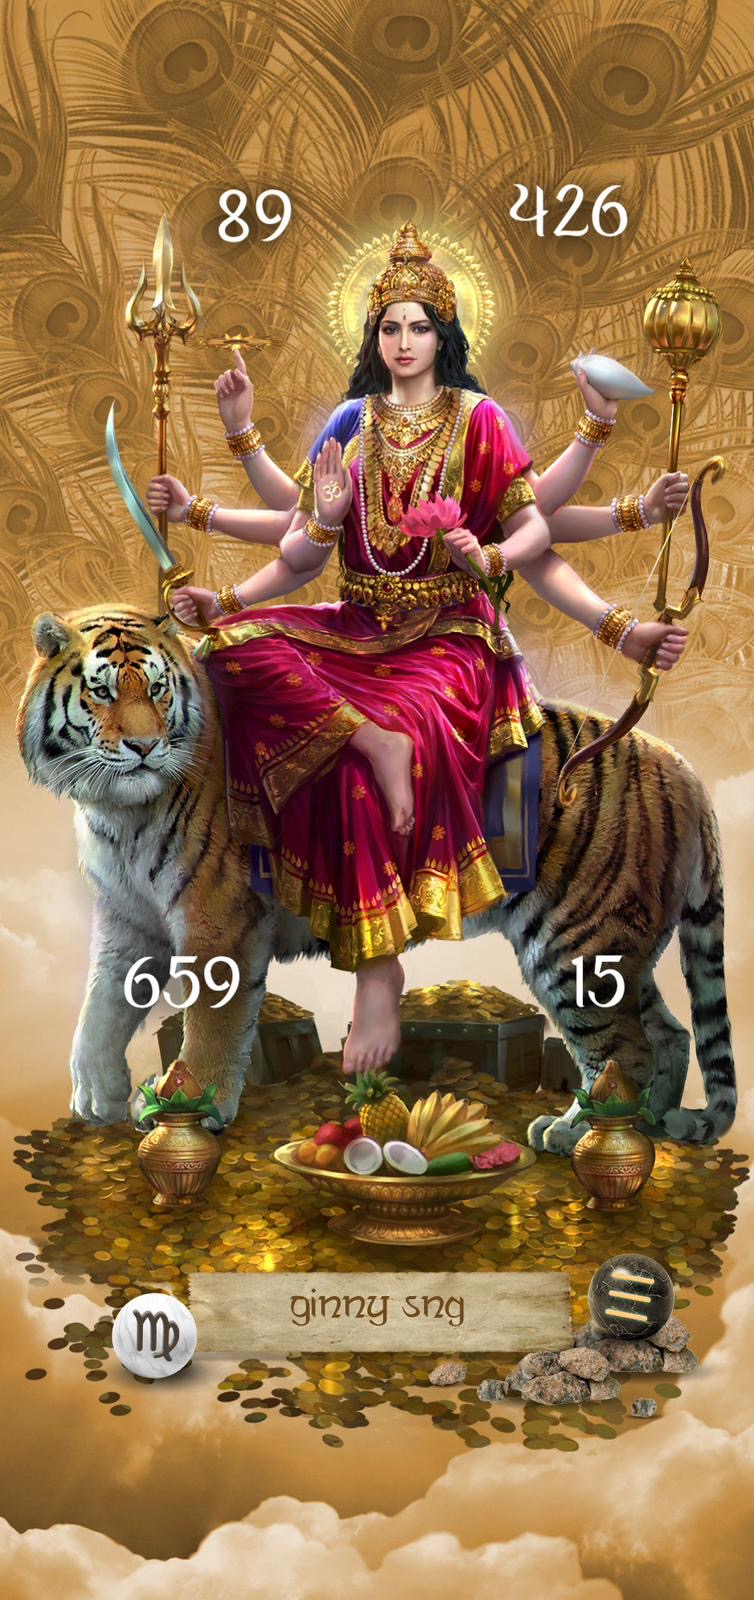 🔮FUTURE , CHILDREN🔮Expert astrologists in Thailand have collaborated to create a special digital wallpaper for all phone models, featuring a customized image of MOTHER UMA DEVI.